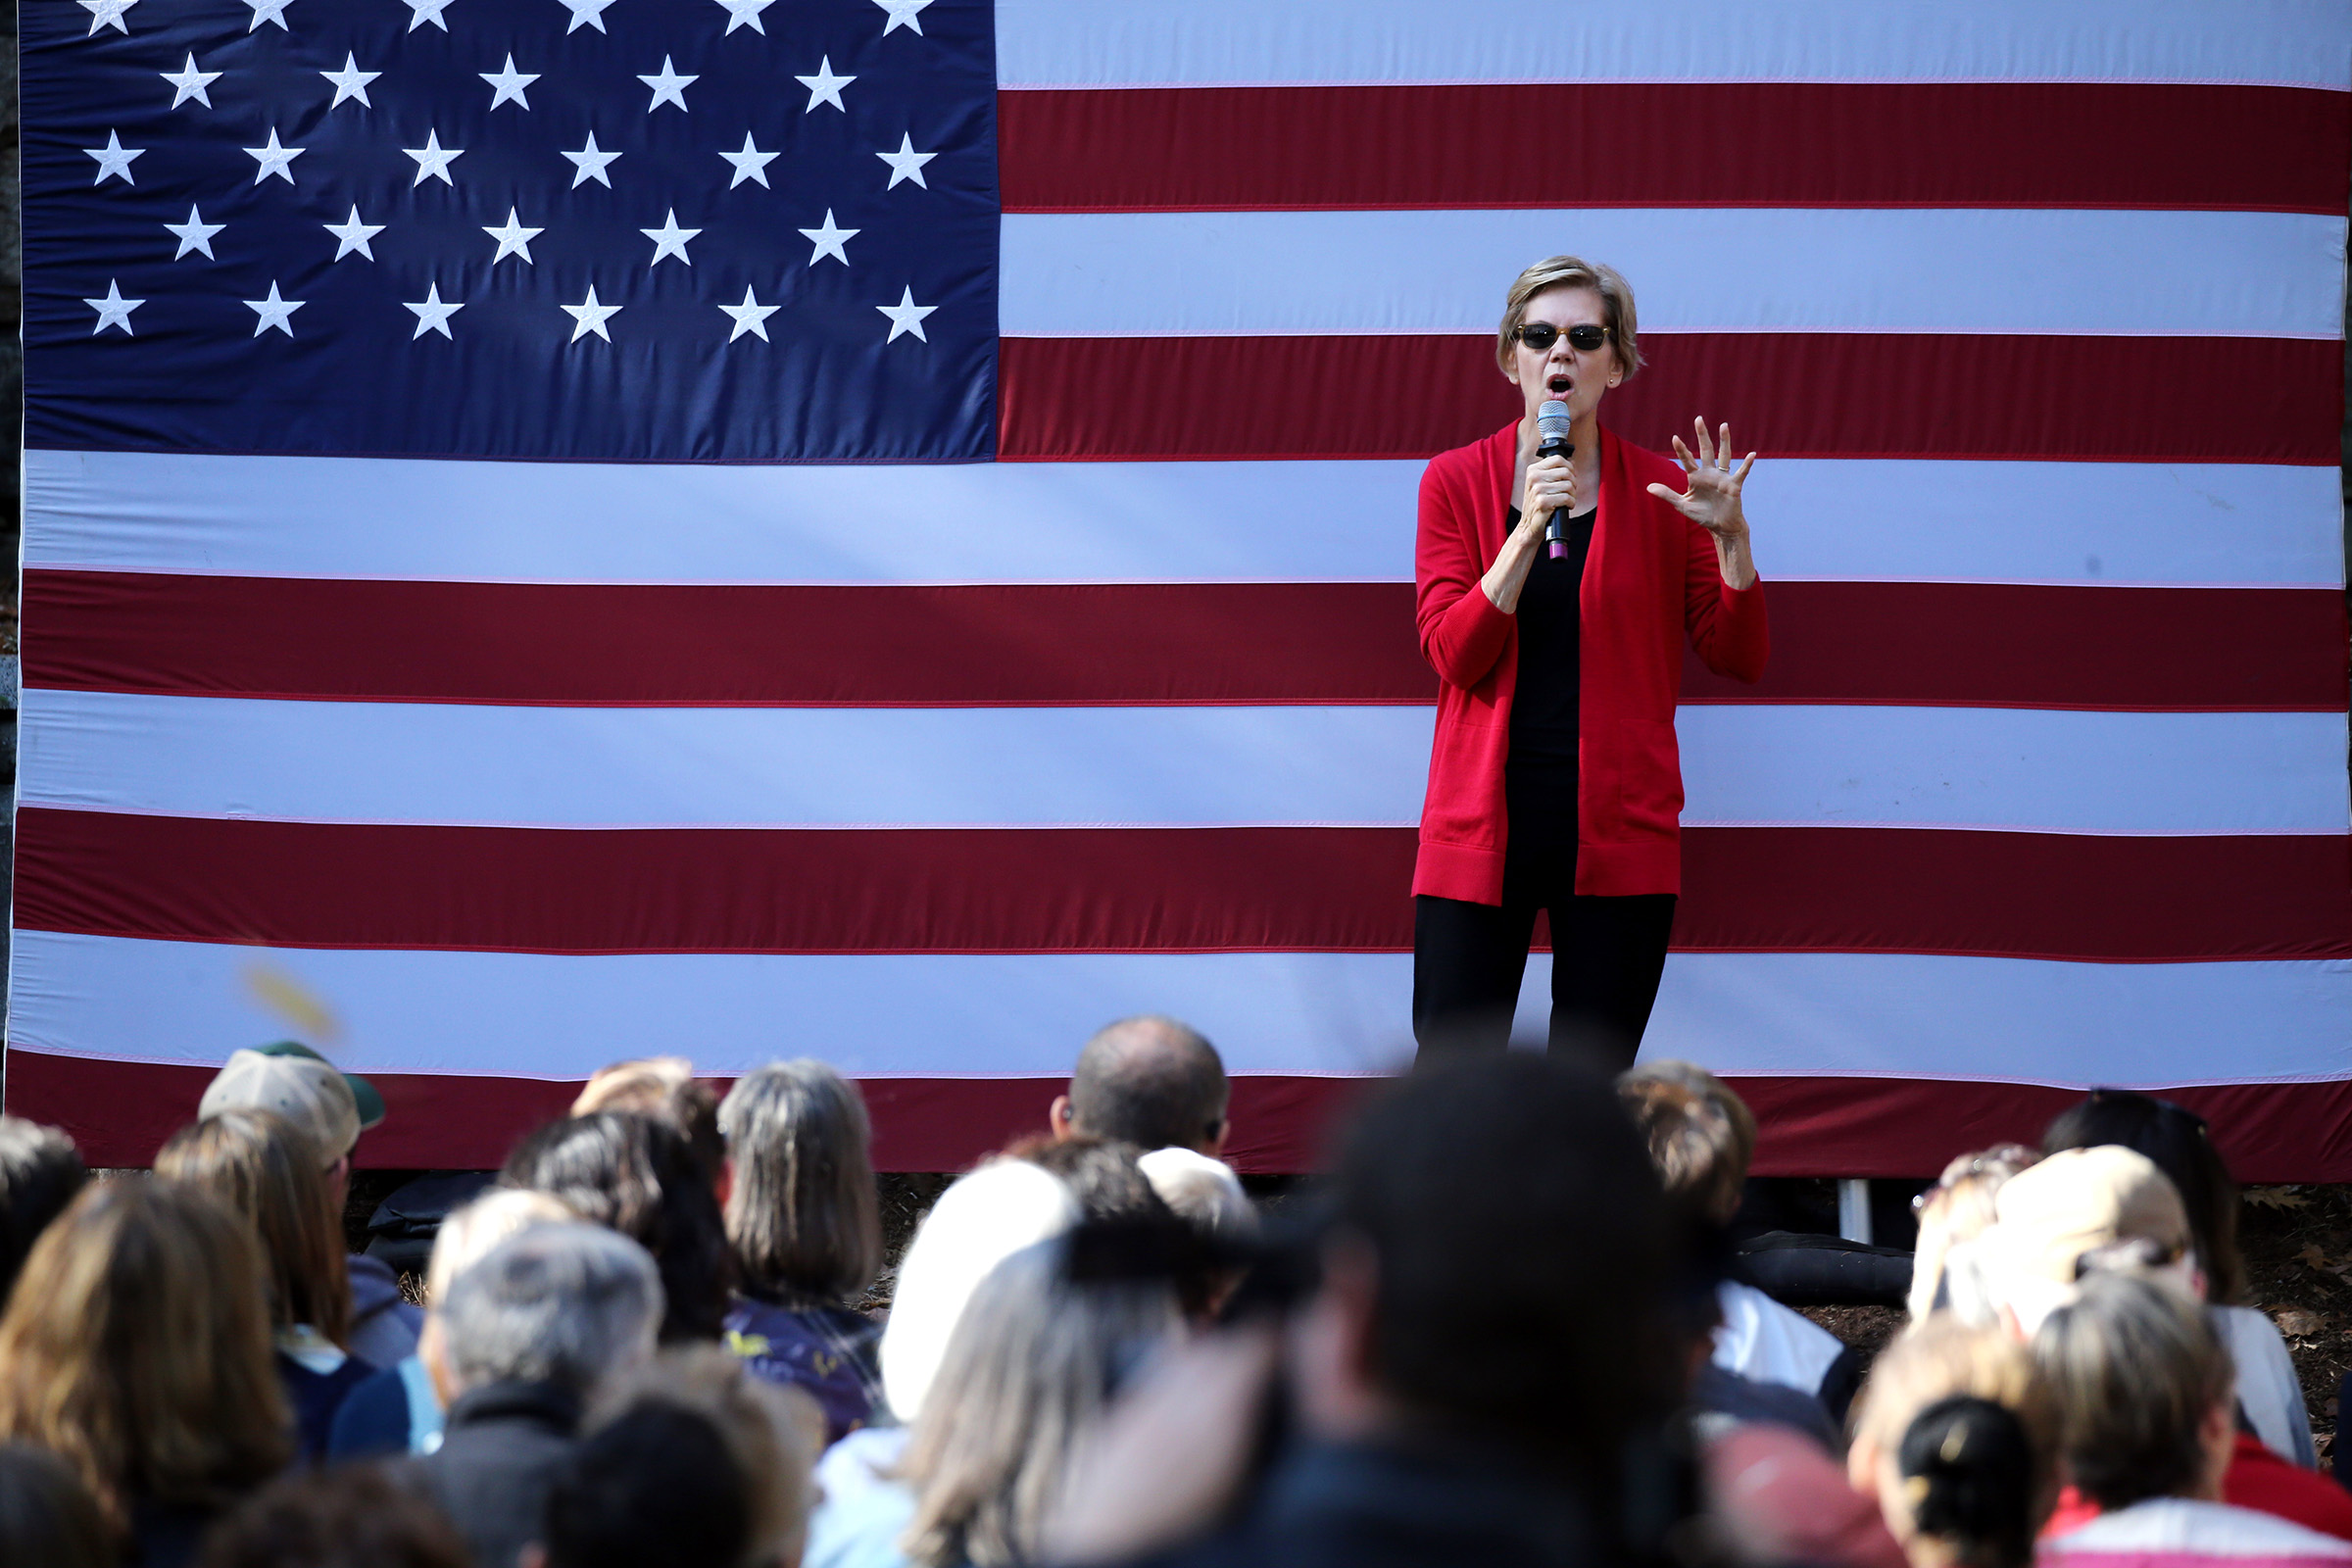 U.S. Senator and presidential candidate Elizabeth Warren speaks during a town hall event Dartmouth College in Hanover, NH on Oct. 24, 2019. (Boston Globe via Getty Images)